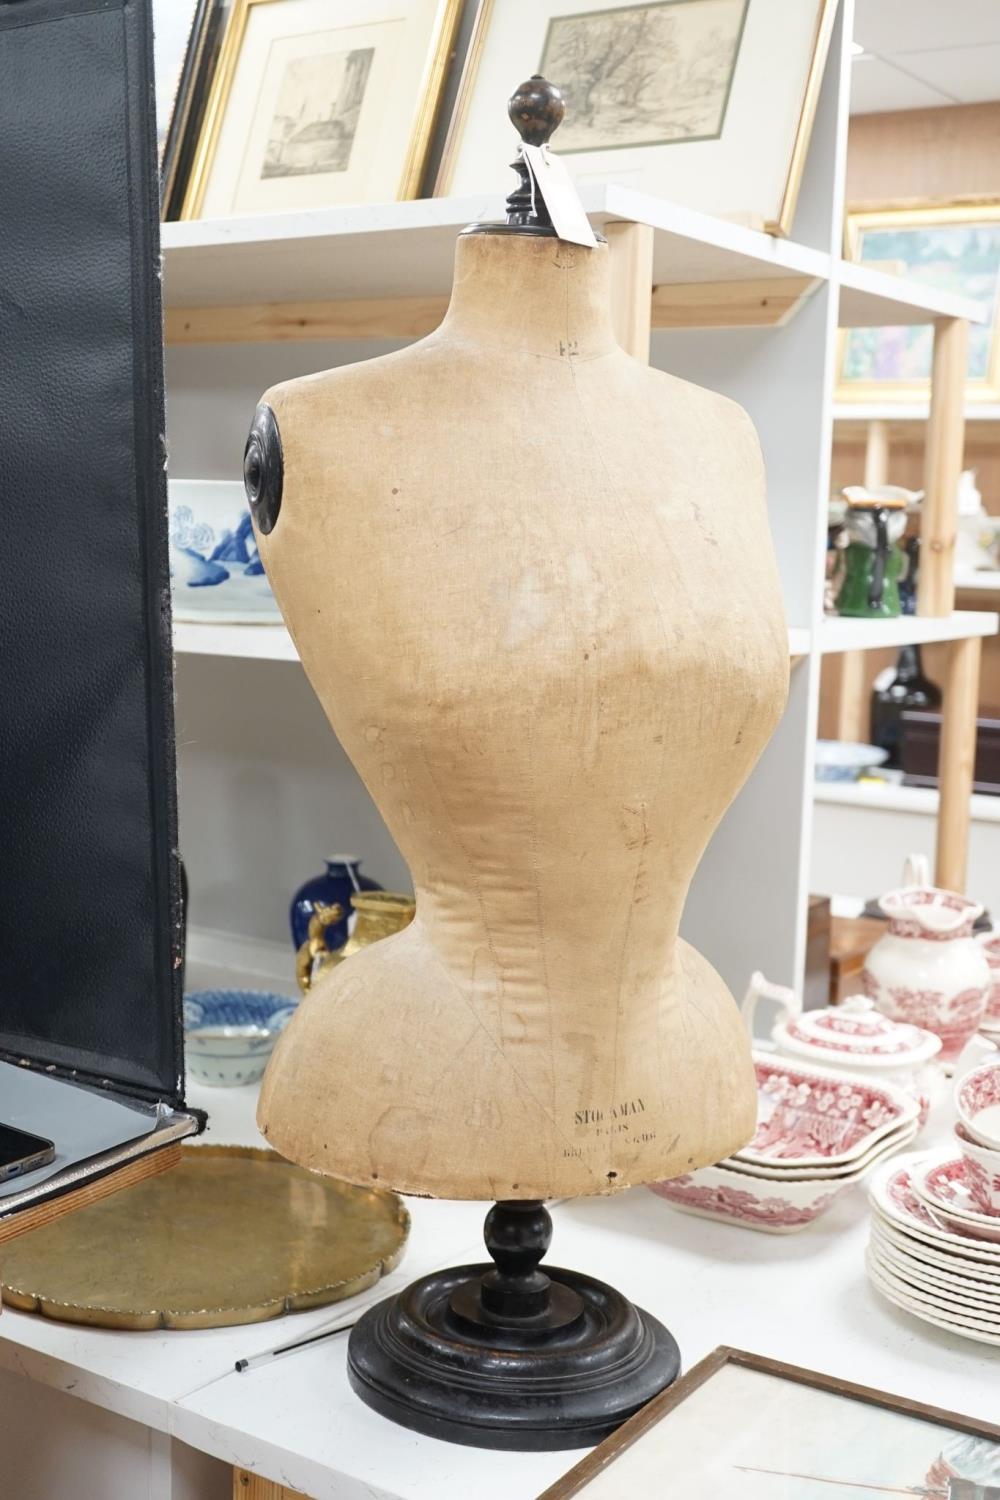 An early Stockman shop-keeper's mannequin or tailor’s dummy, 84 cm high